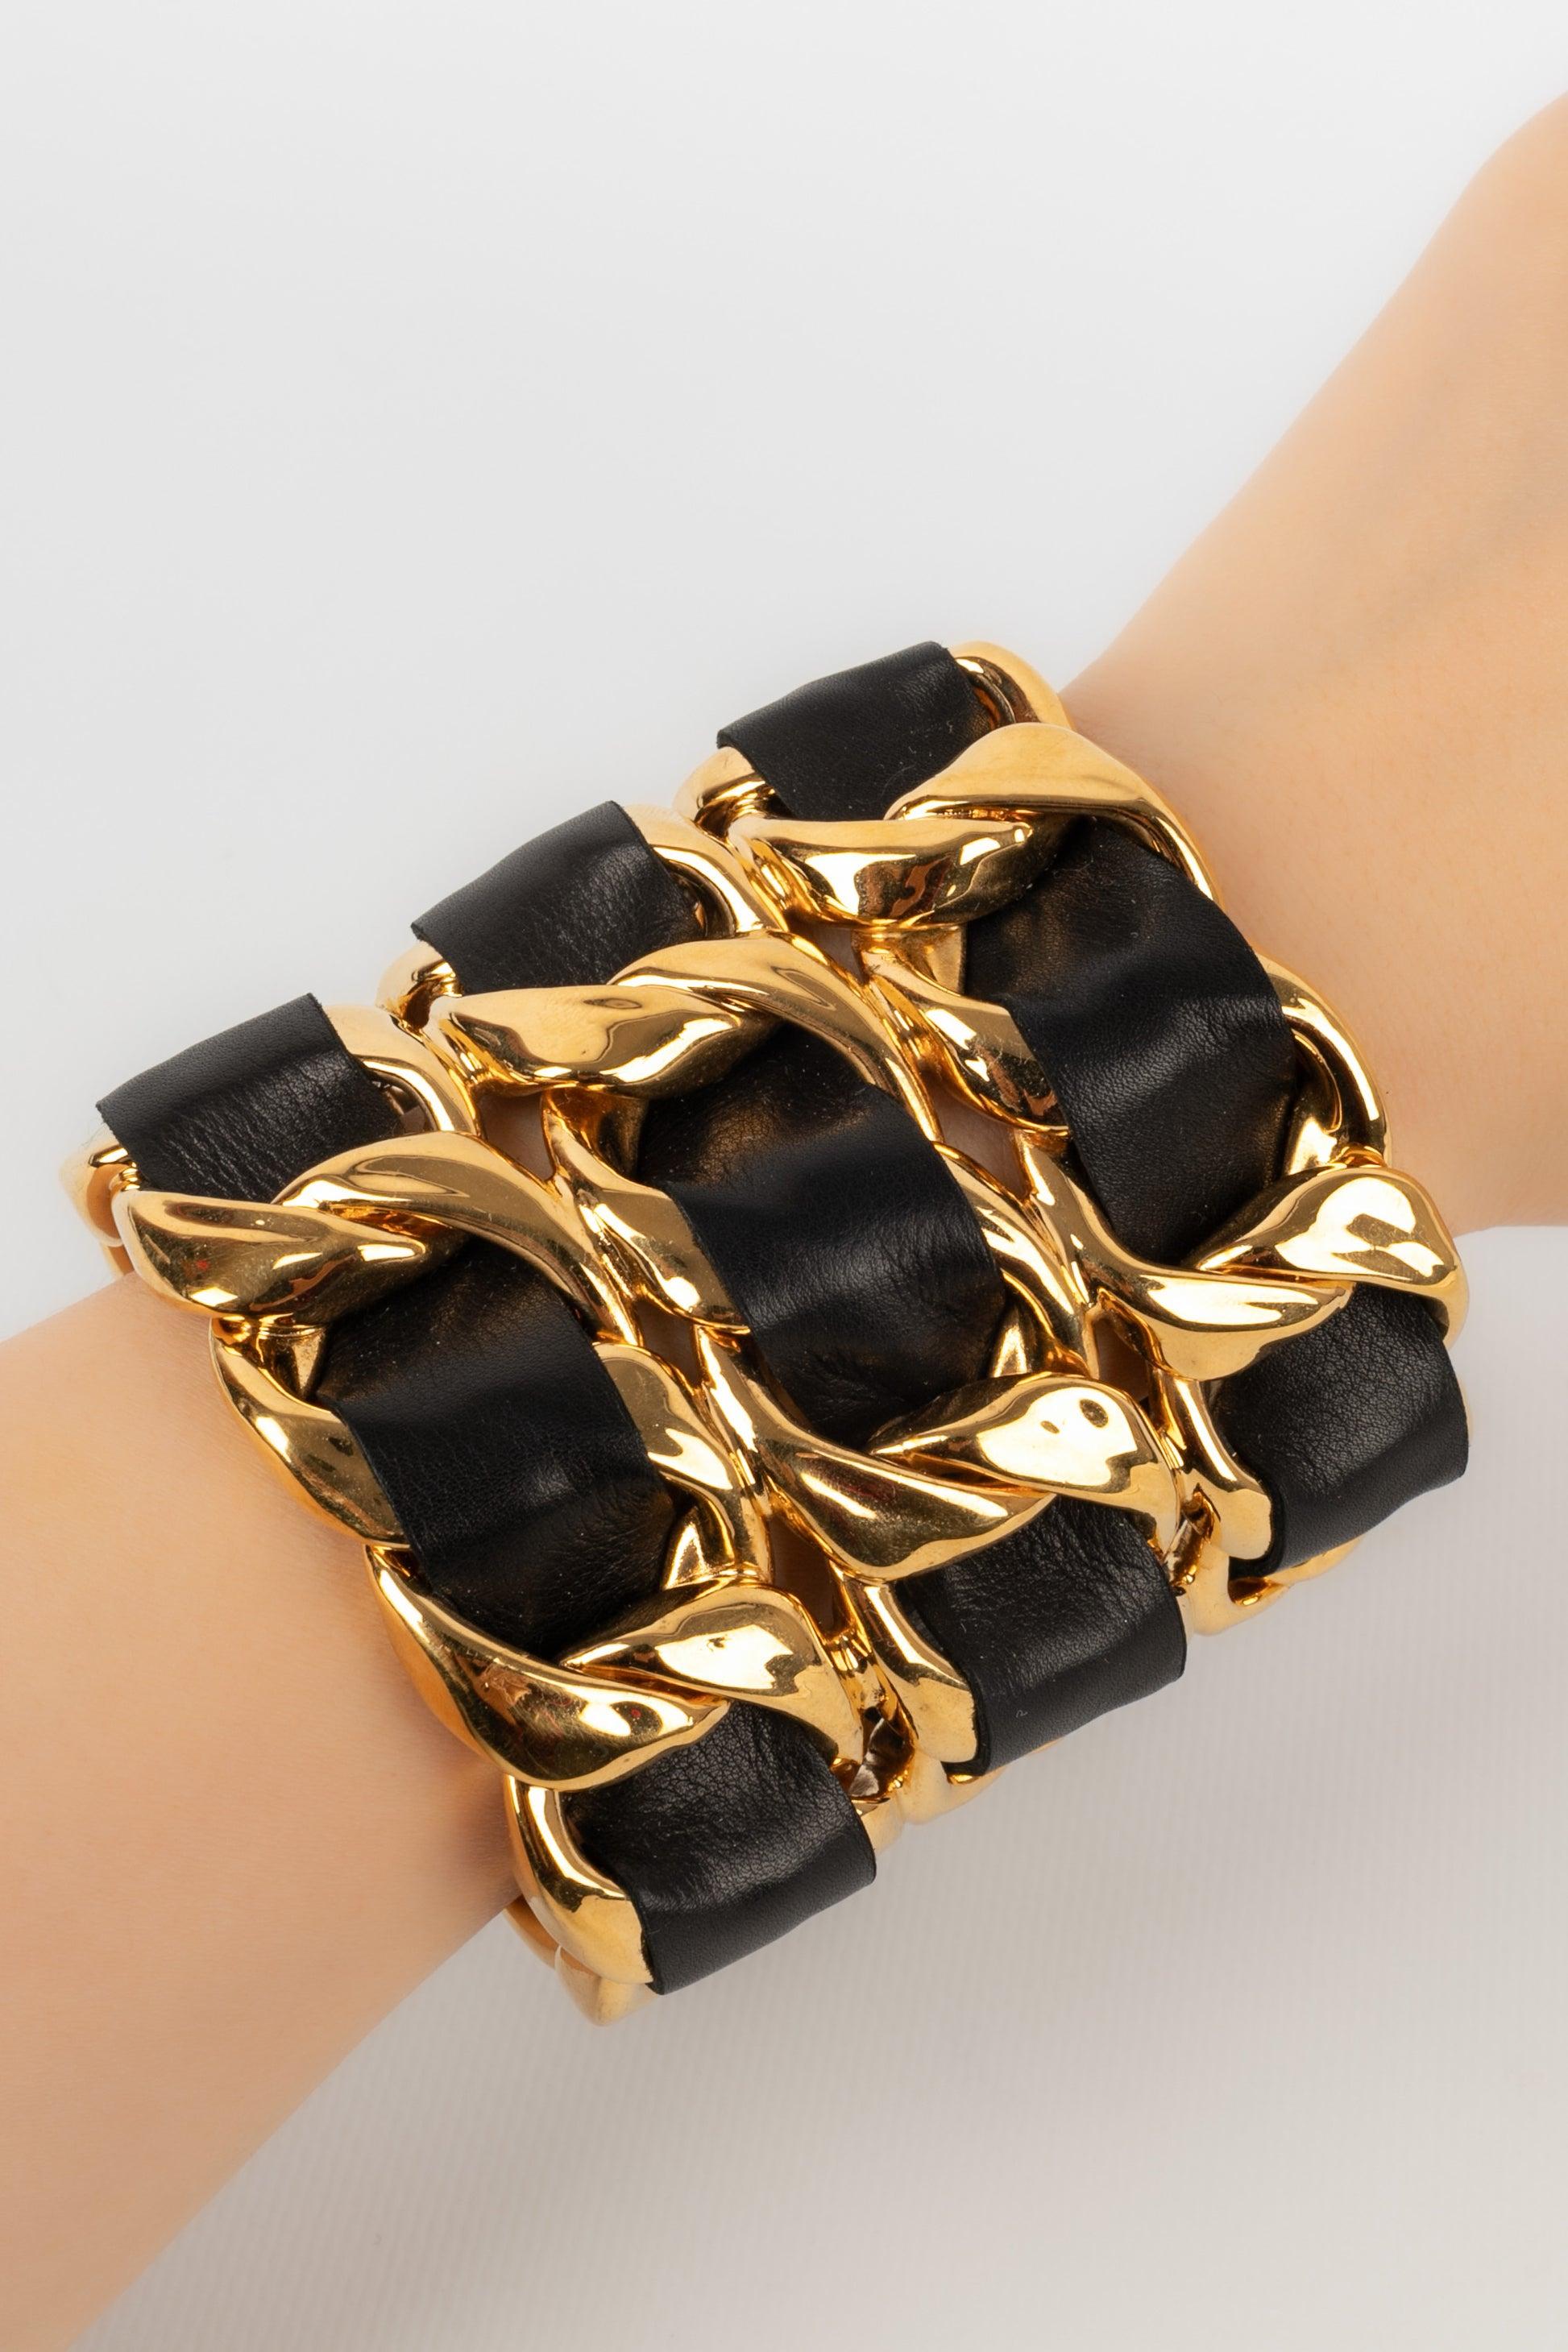 Chanel Cuff Bracelet in Golden Metal with Black Leather, 1980s For Sale 5